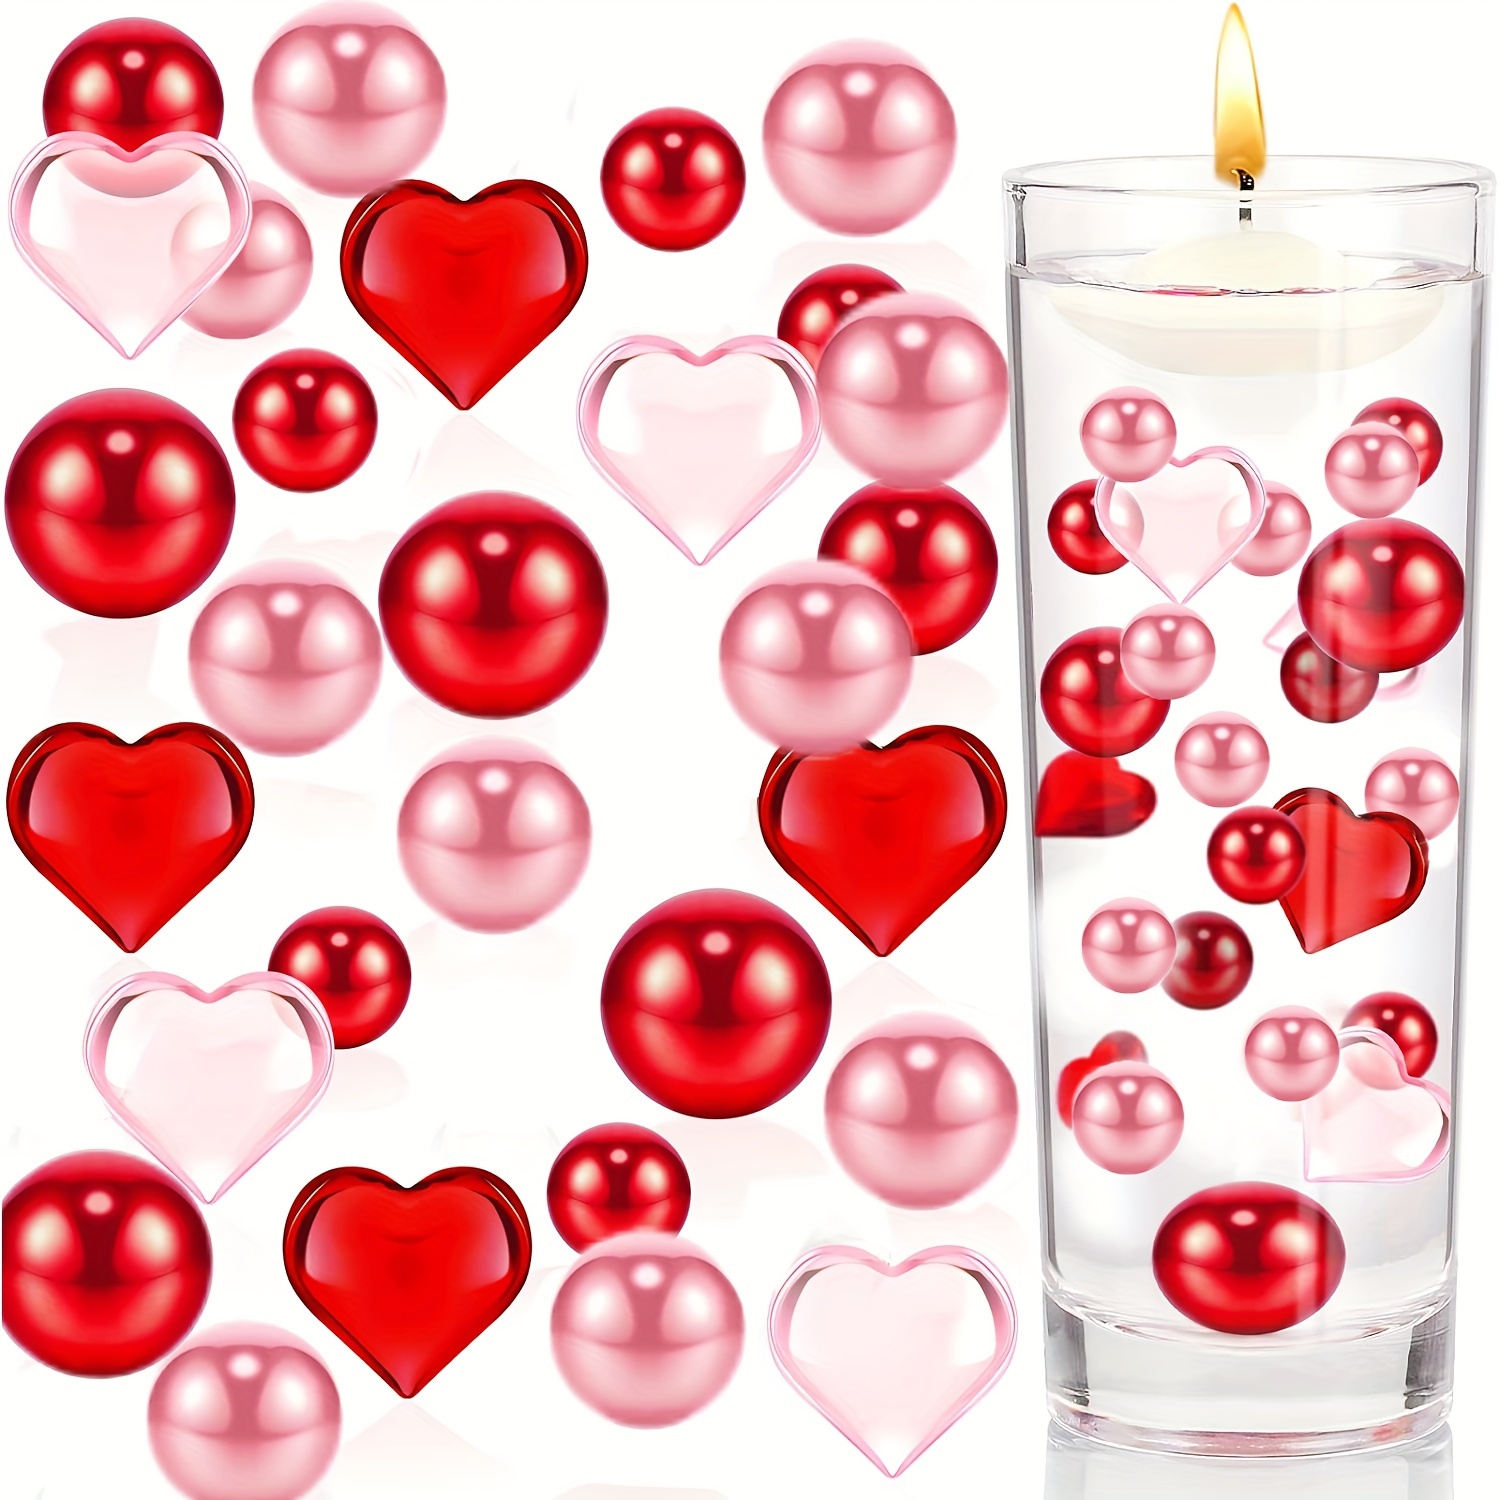 Red Heart Acrylic Vase Fillers Table Scatters for Valentines Mothers Day